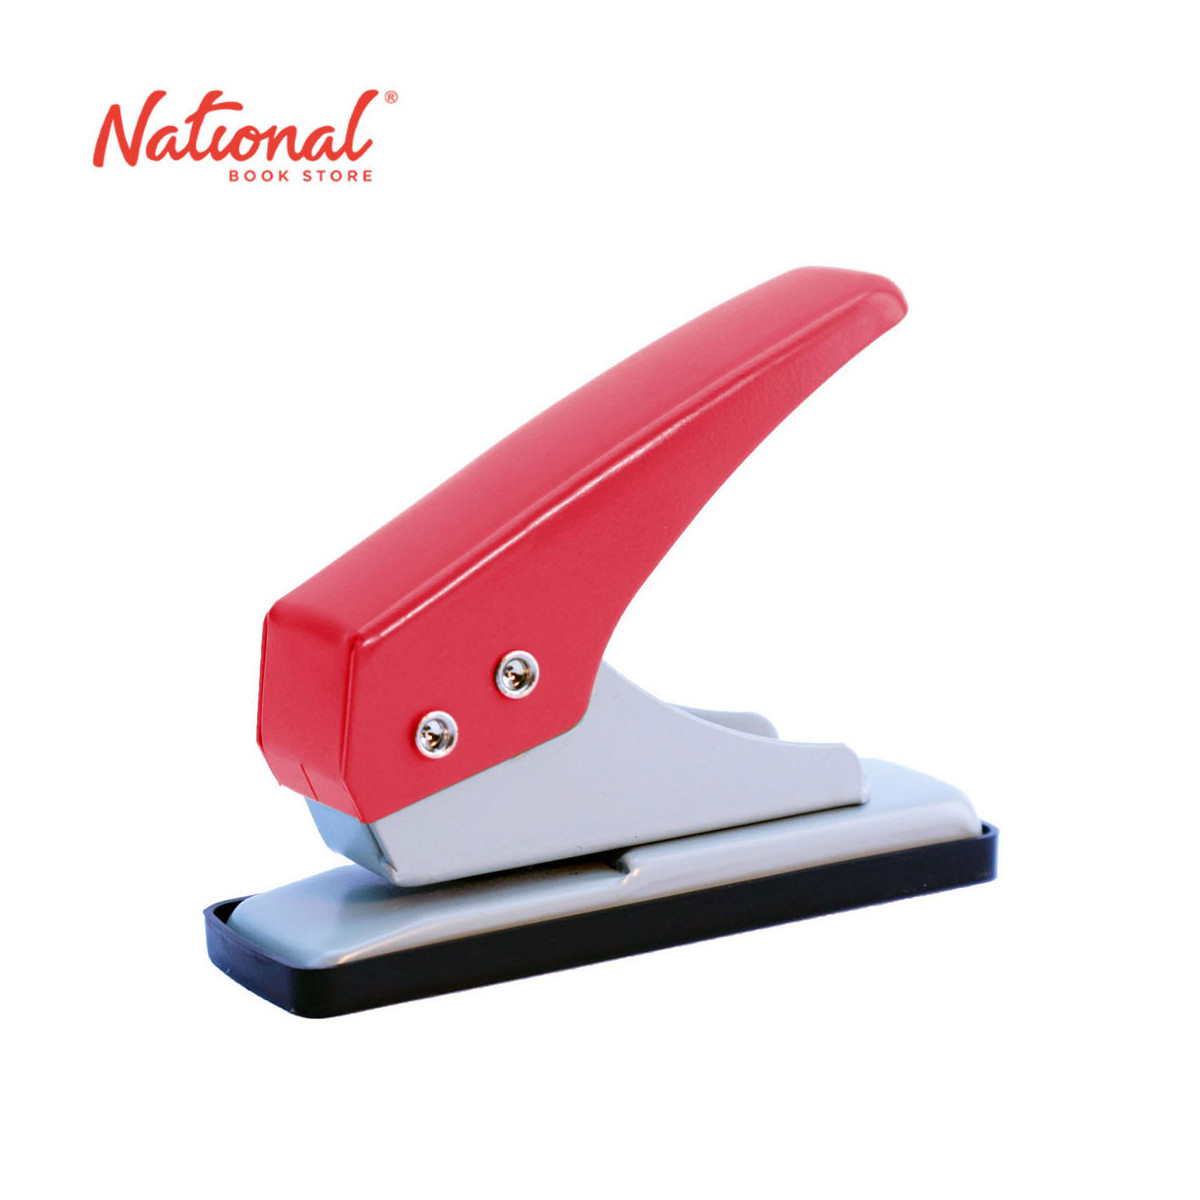 1 Hole Punch,Single Hole Puncher,Classic Office Paper Punch for